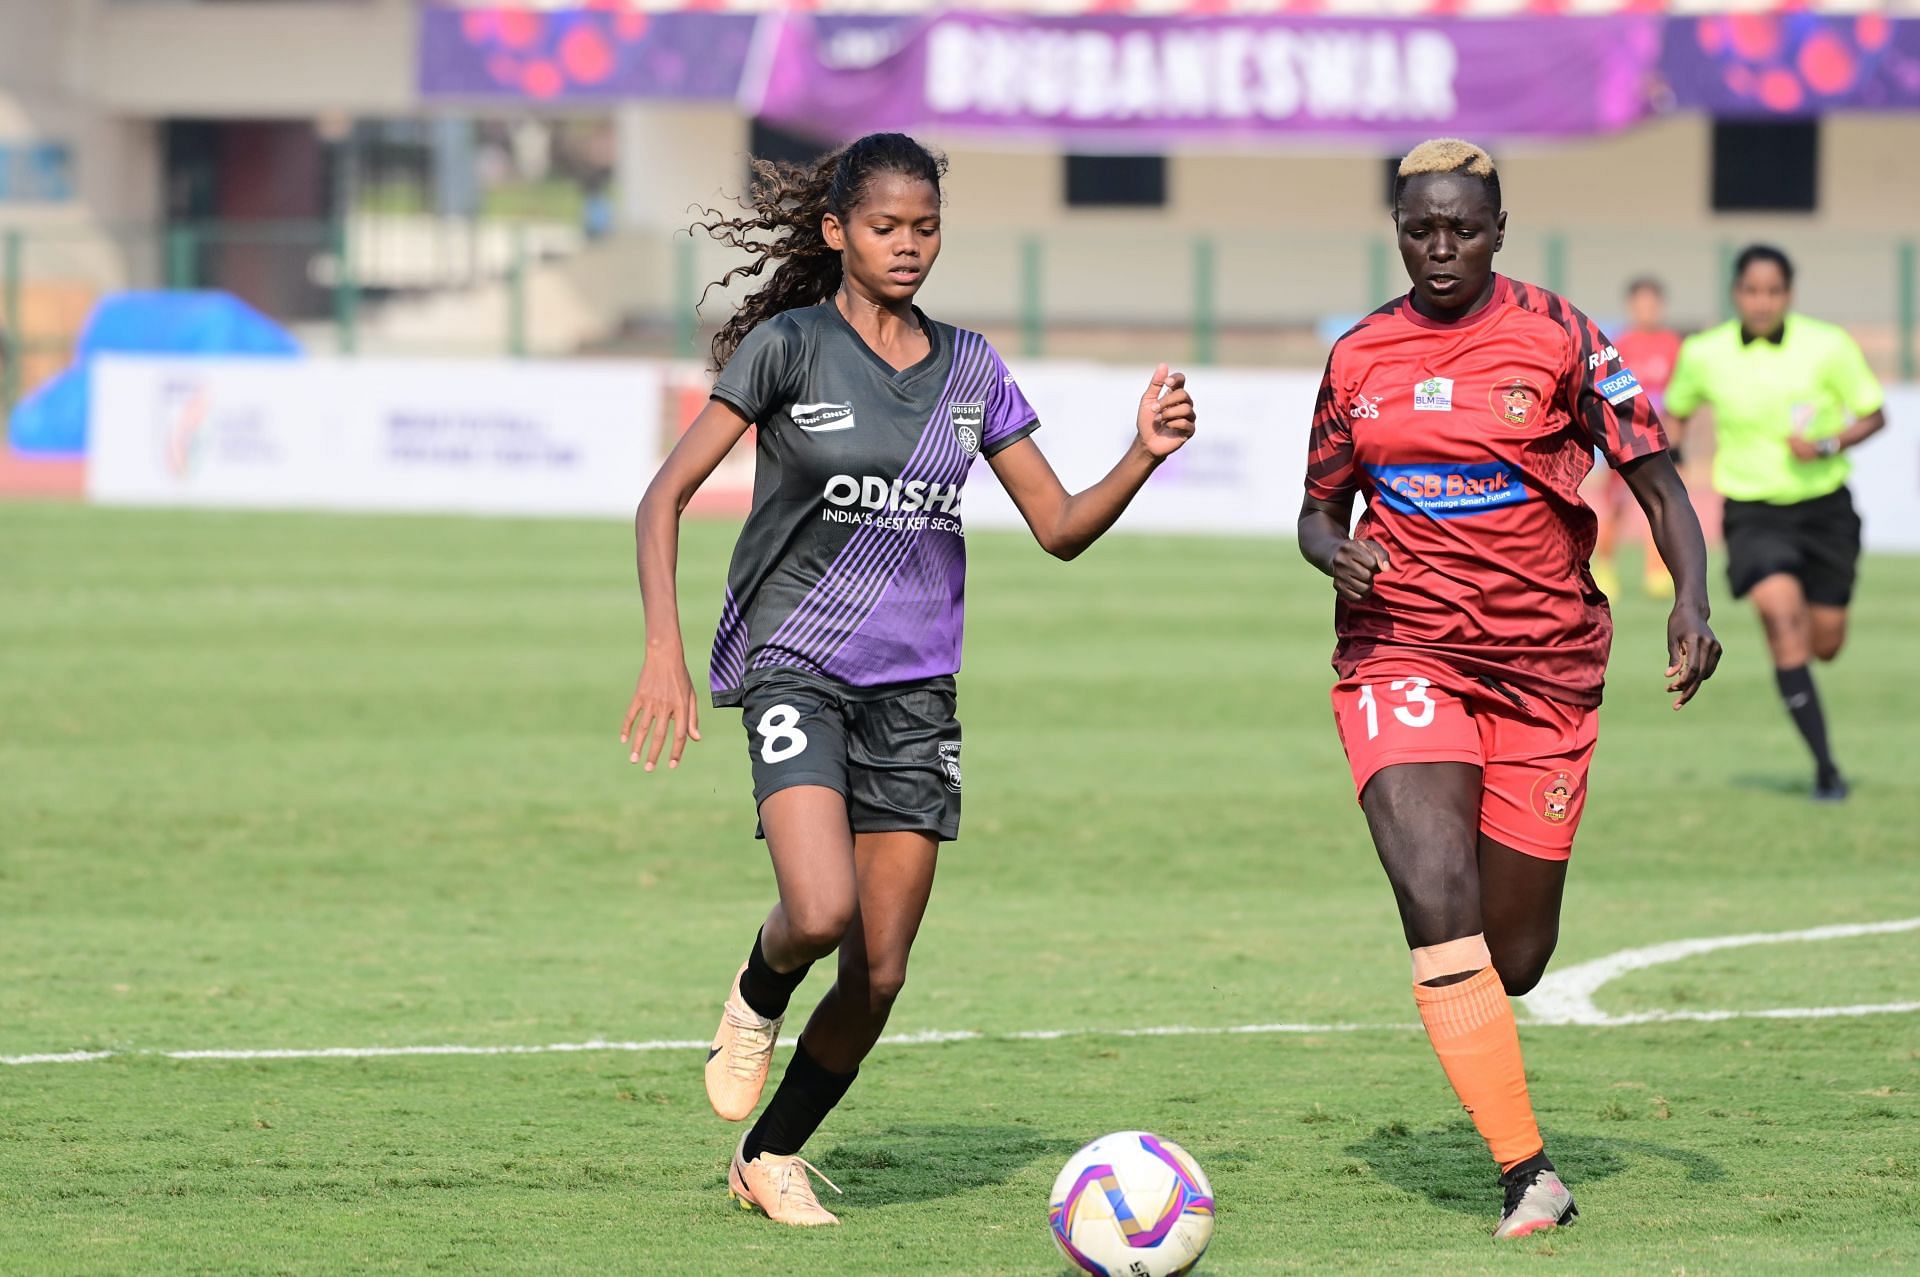 Jasoda vying for the ball with Phoeby Okech of Gokulam Kerala in the IWL (Image - OFC Media)